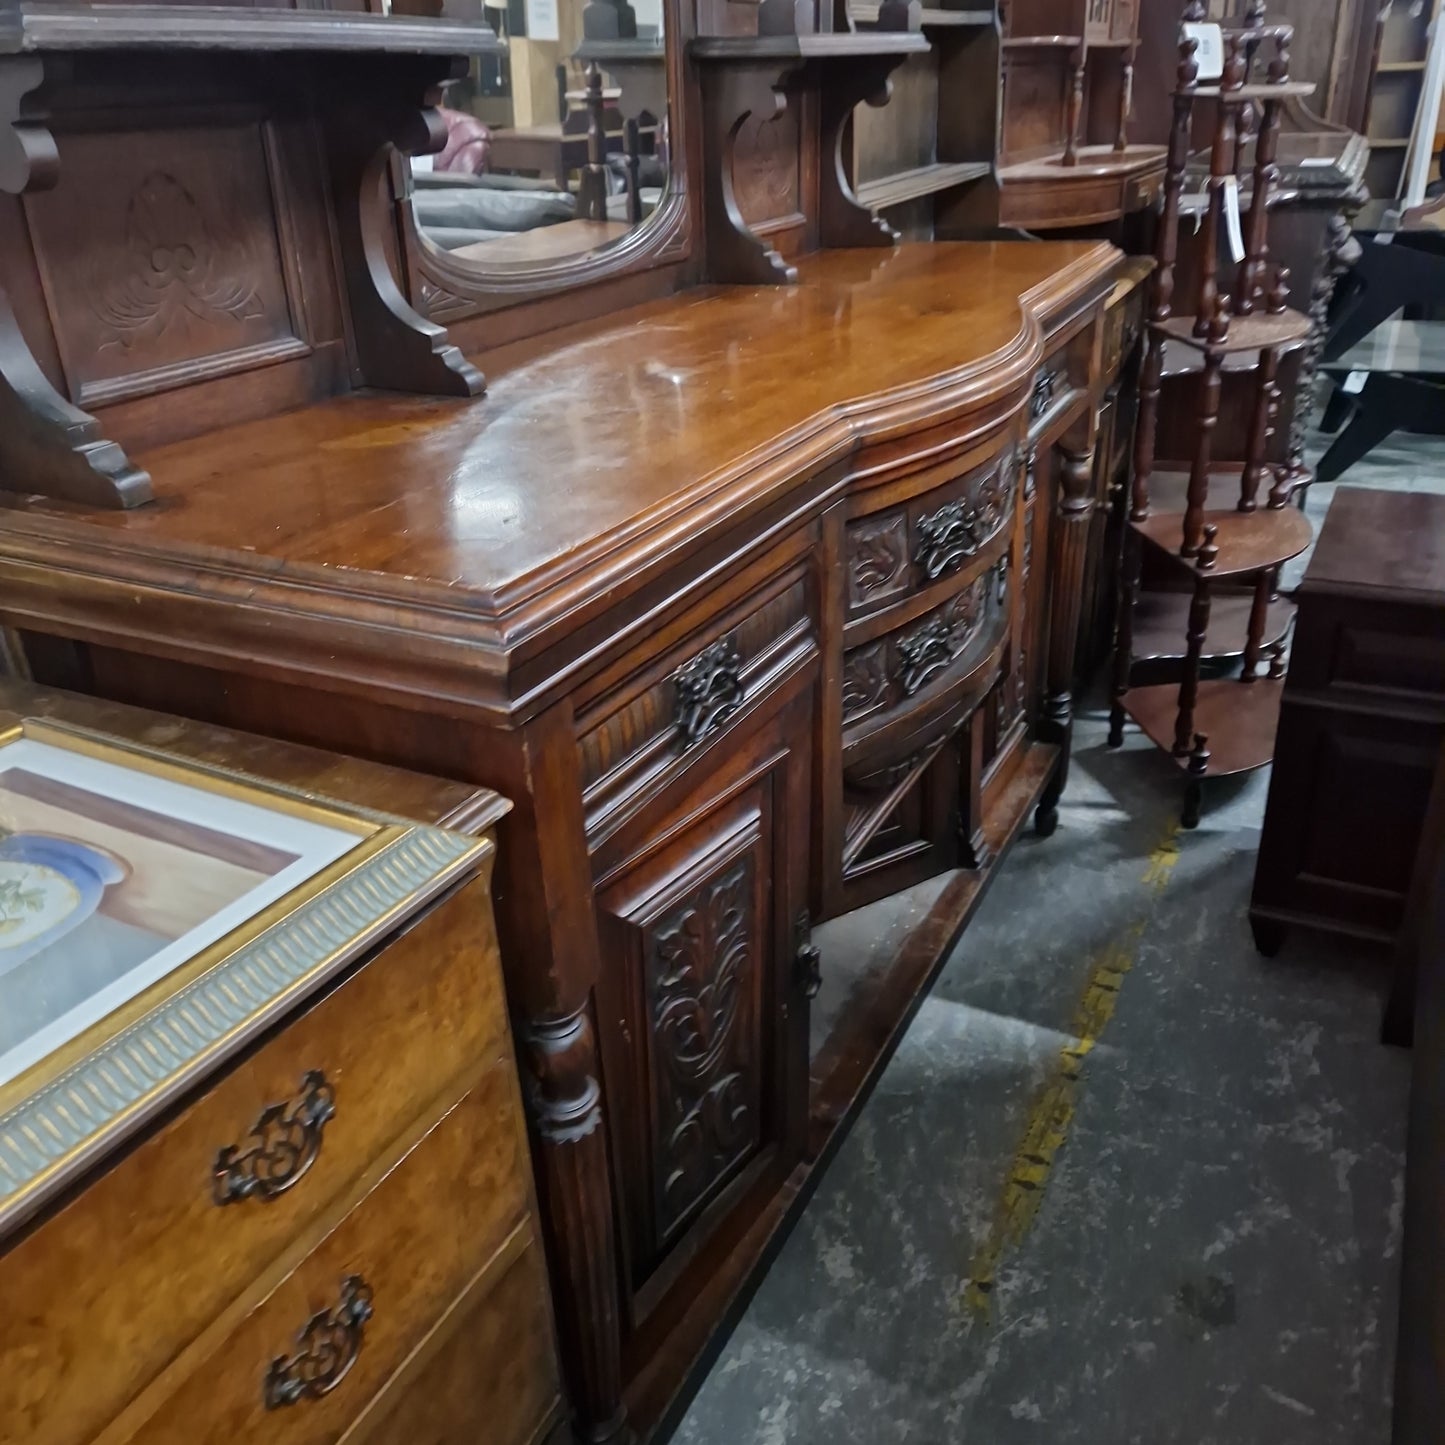 Large solid mahogany carved sideboard with back drop mirror and drawers